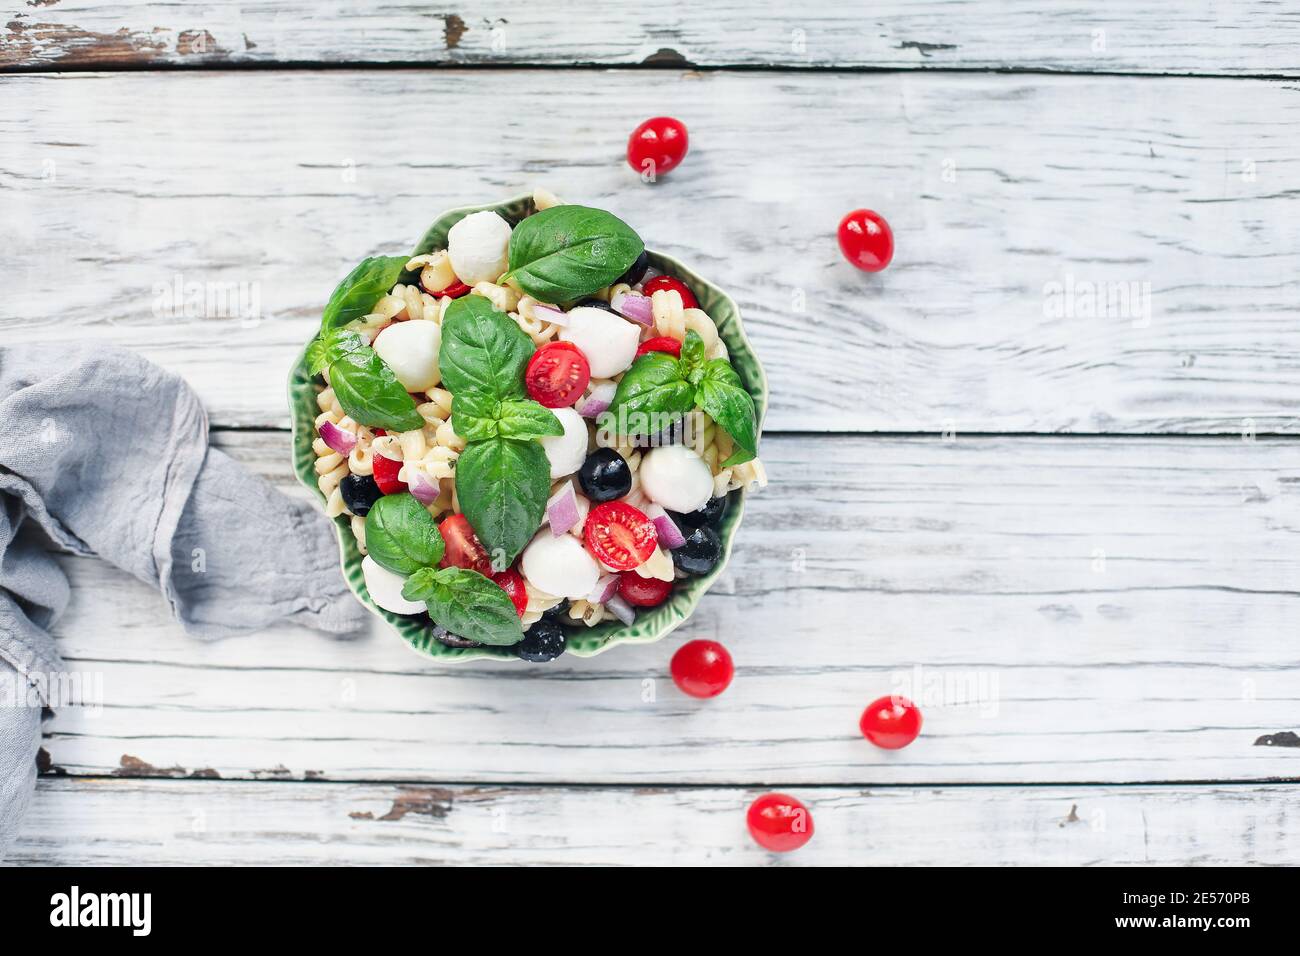 Italian pasta salad with fresh tomatoes, black olives, red onion mozzarella cheese balls, basil, and an olive oil dressing. Image shot from above. Stock Photo